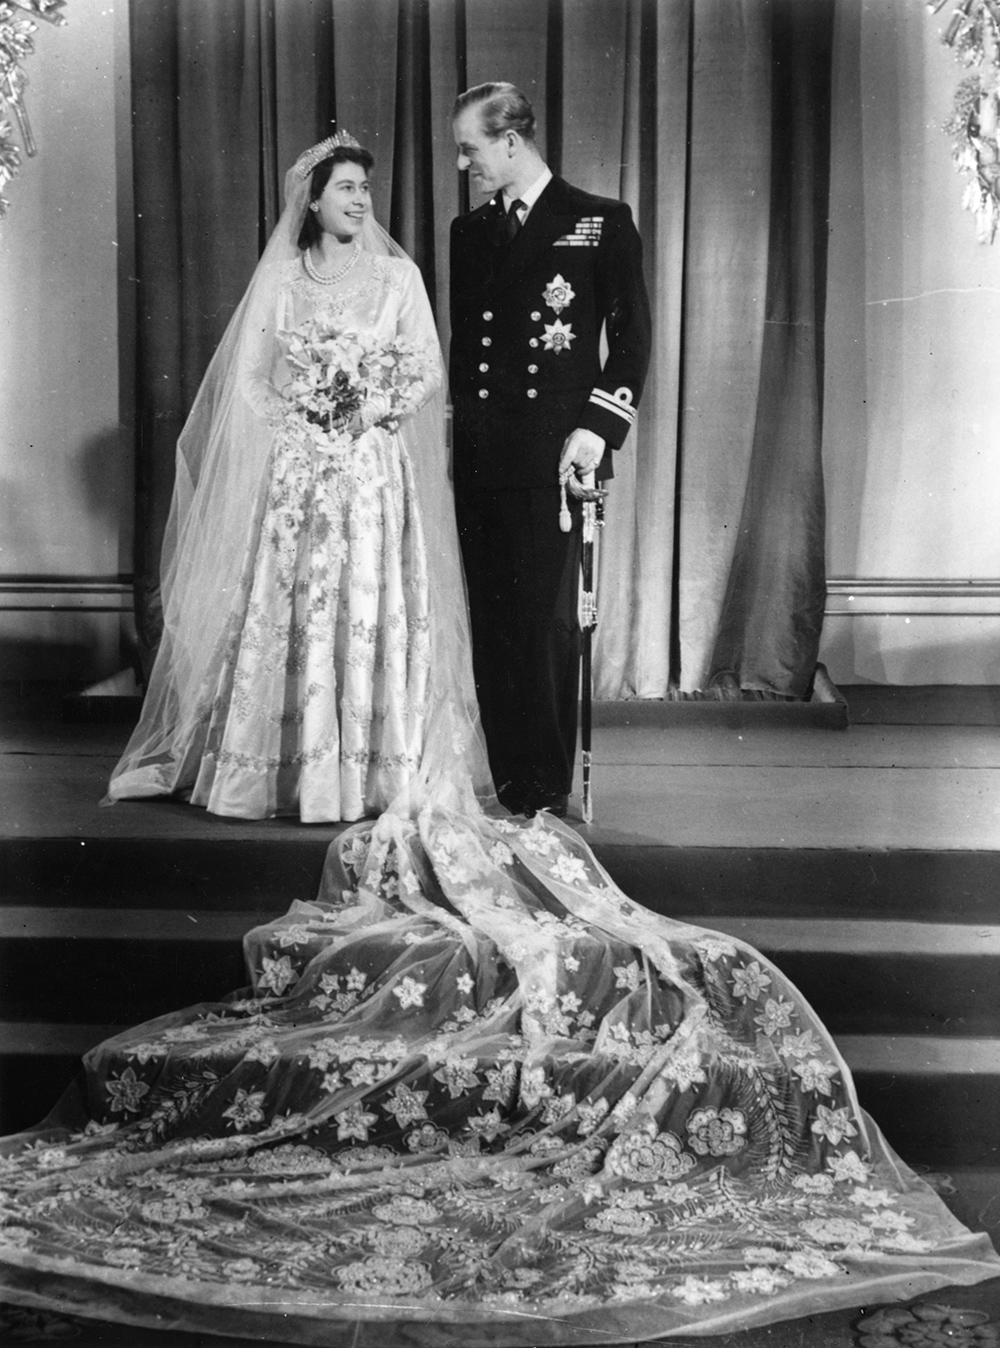 Princess Elizabeth with Philip Mountbatten on their wedding day on 20 November, 1947. Photo / Getty Images